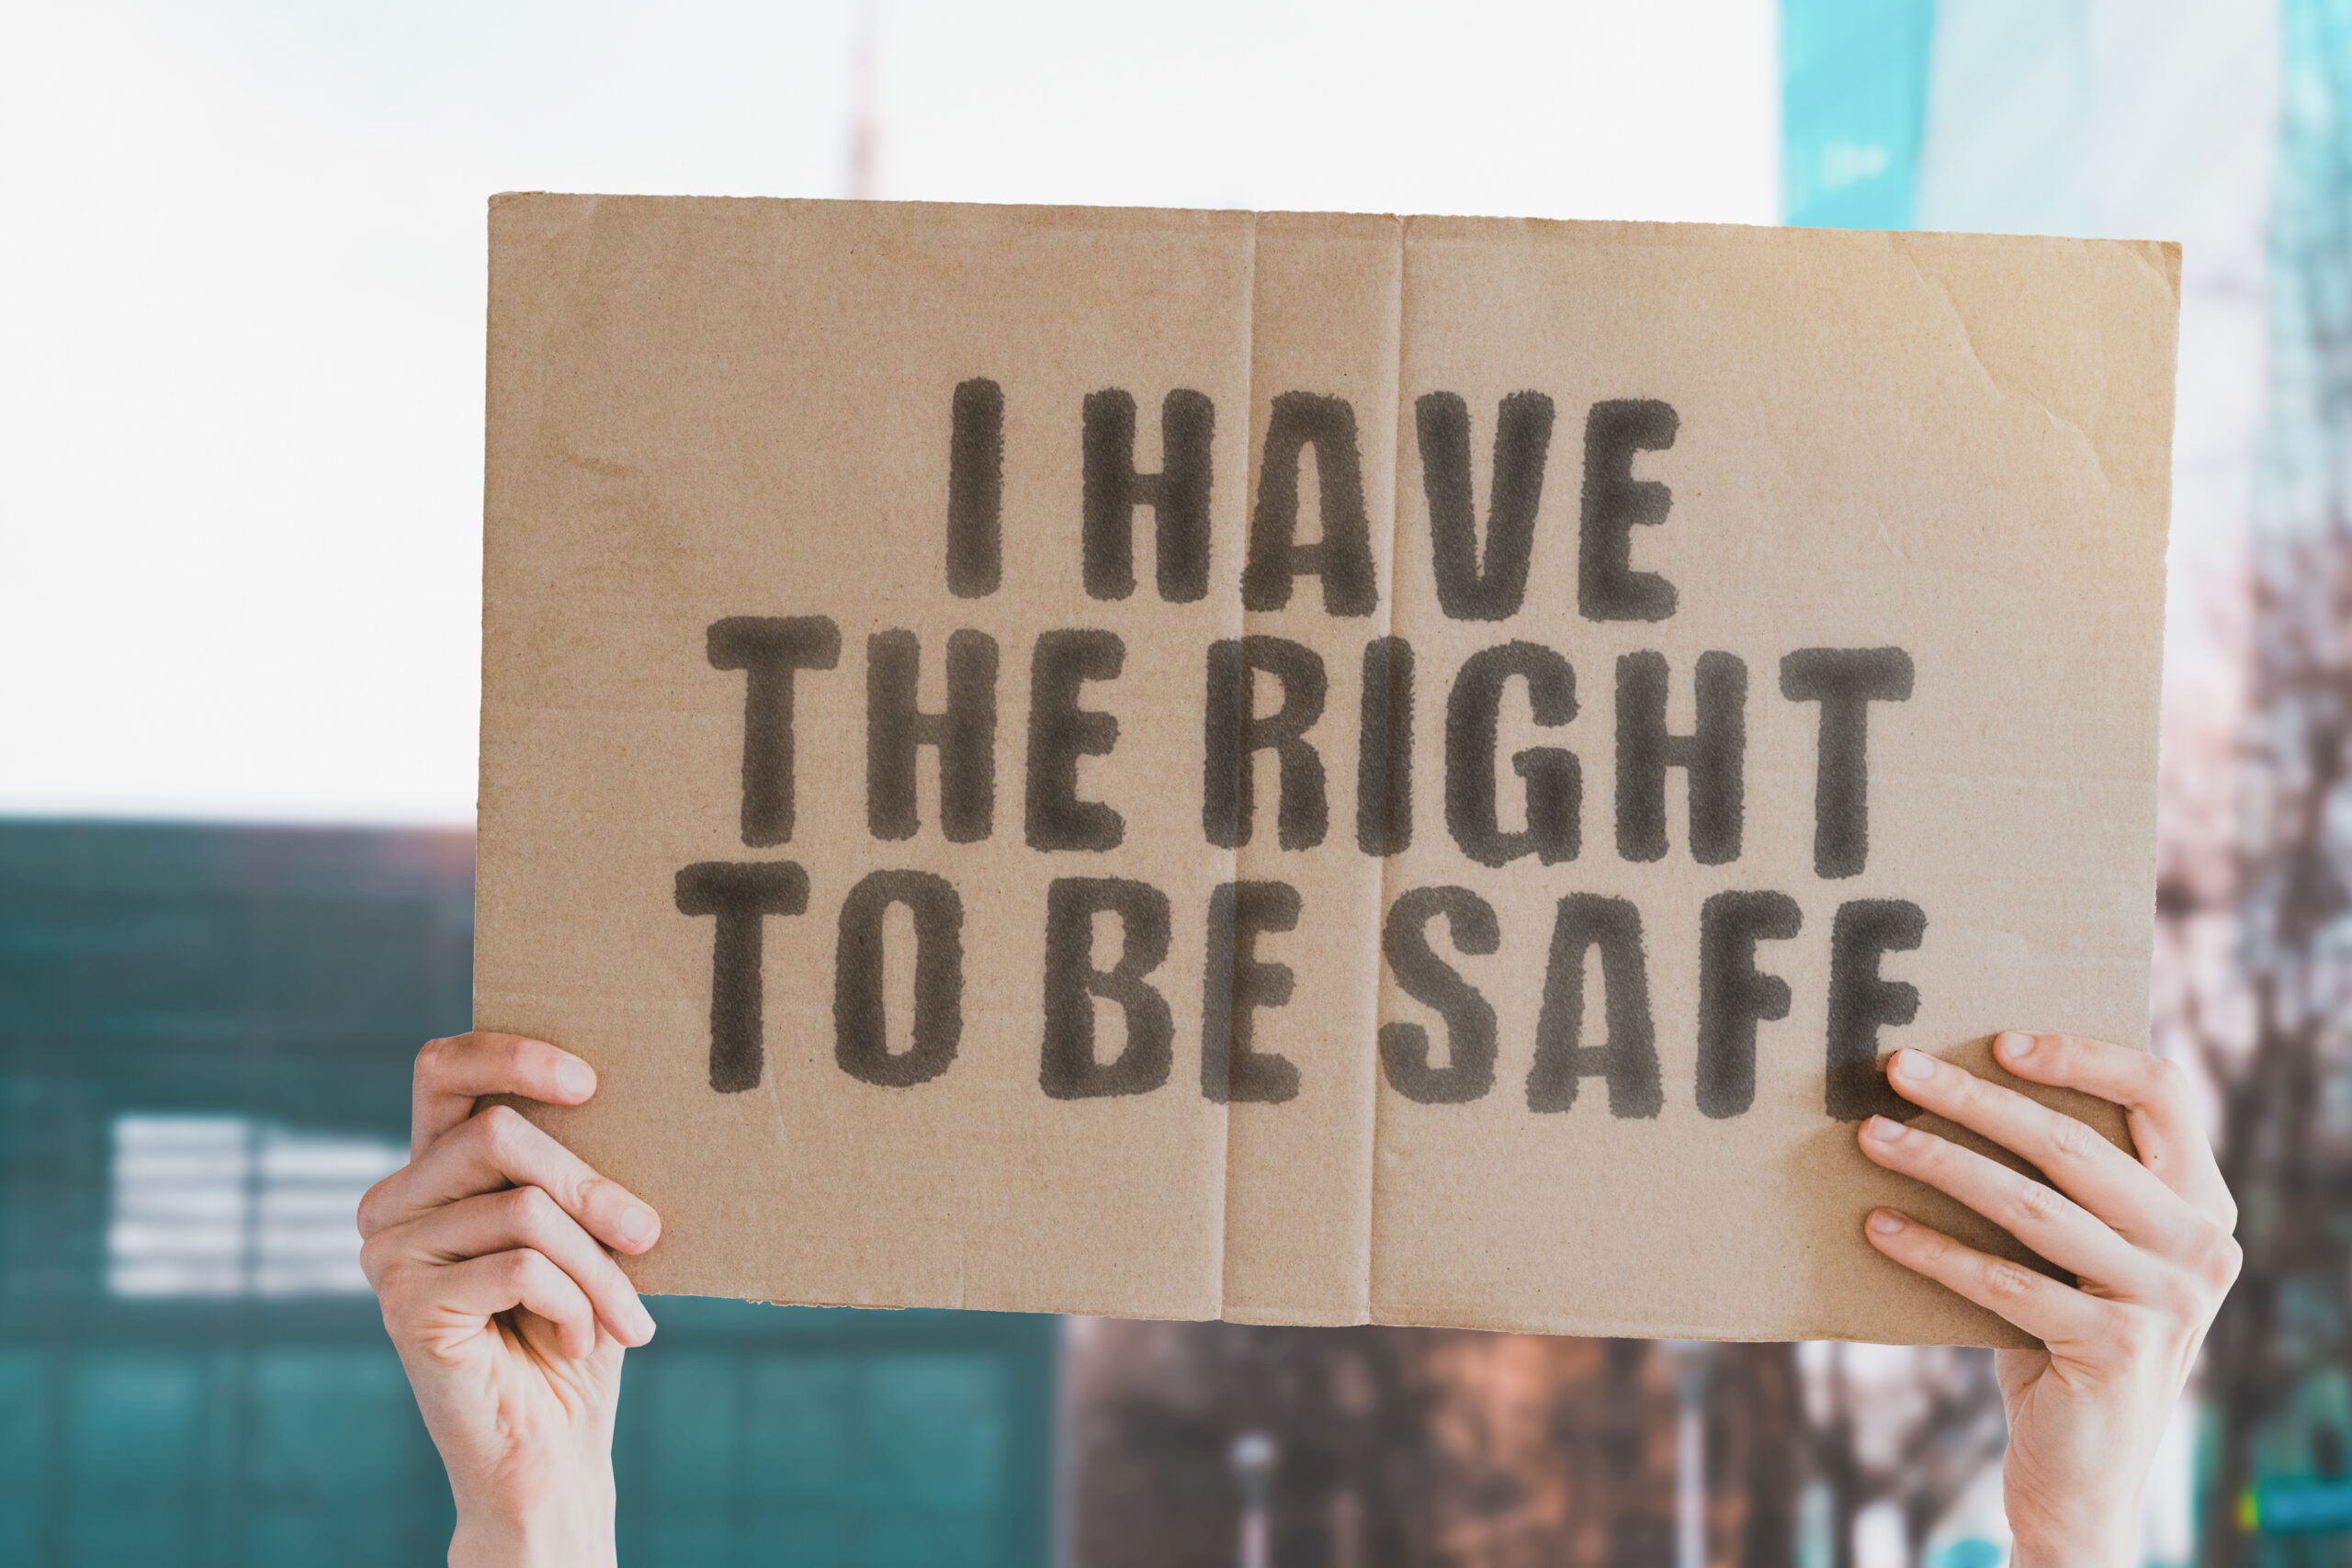 The,phrase,",i,have,the,right,to,be,safe